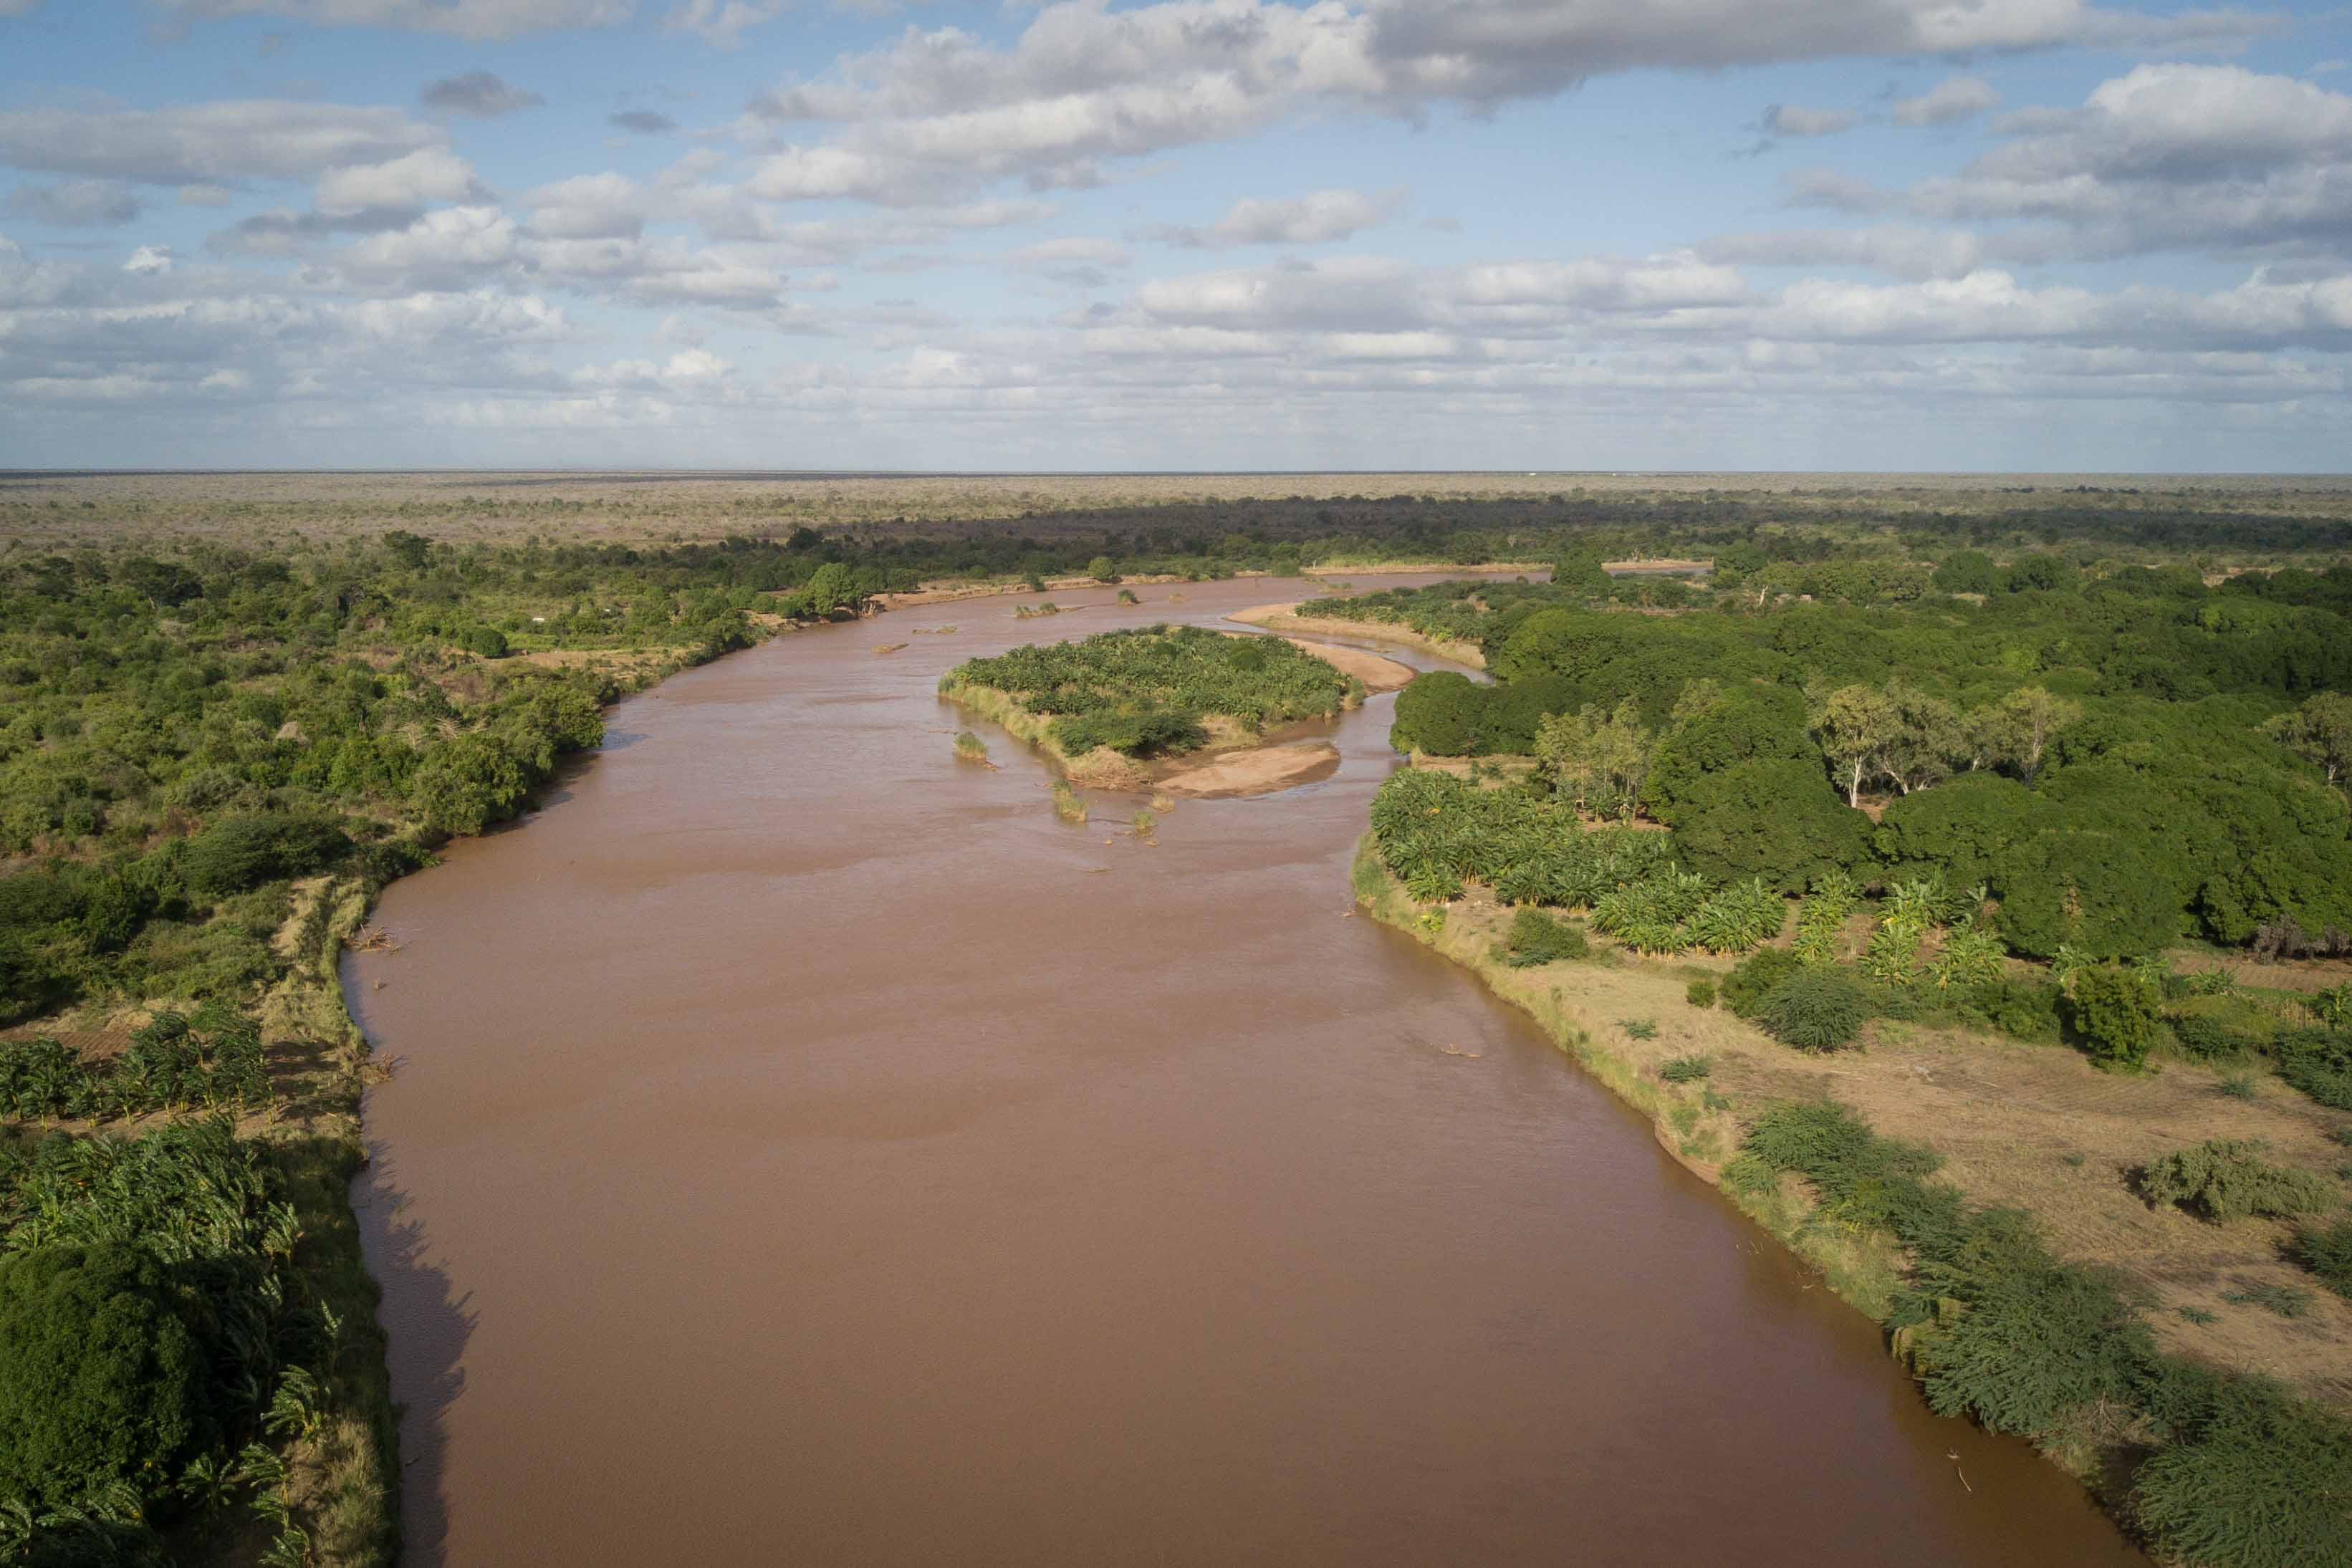 Aerial photo of the Tana River